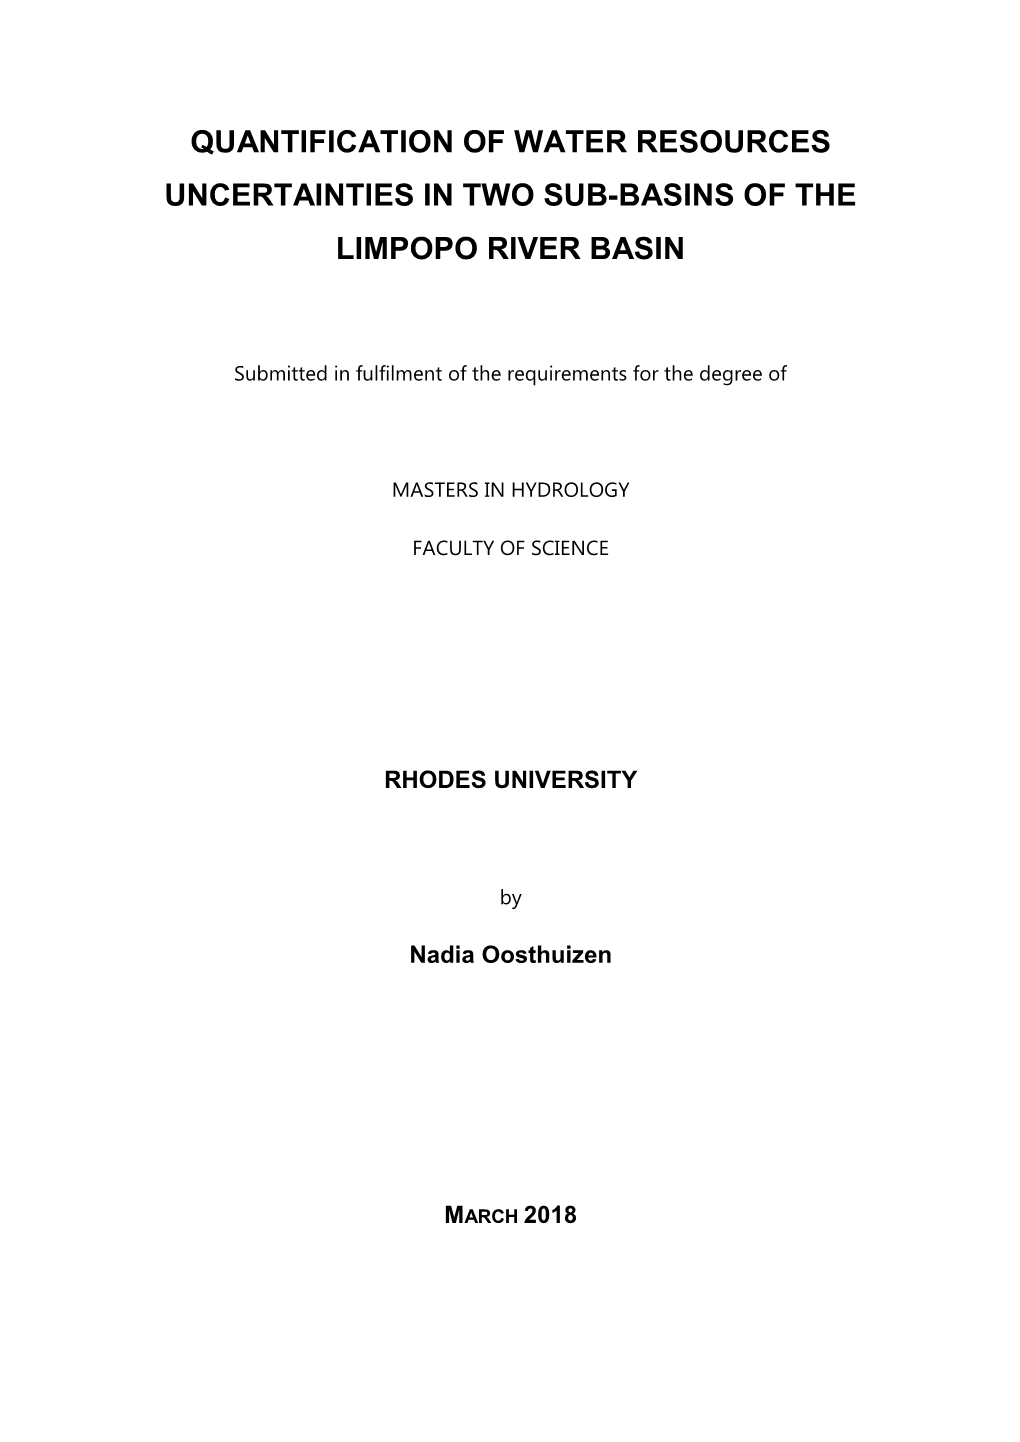 Quantification of Water Resources Uncertainties in Two Sub-Basins of the Limpopo River Basin